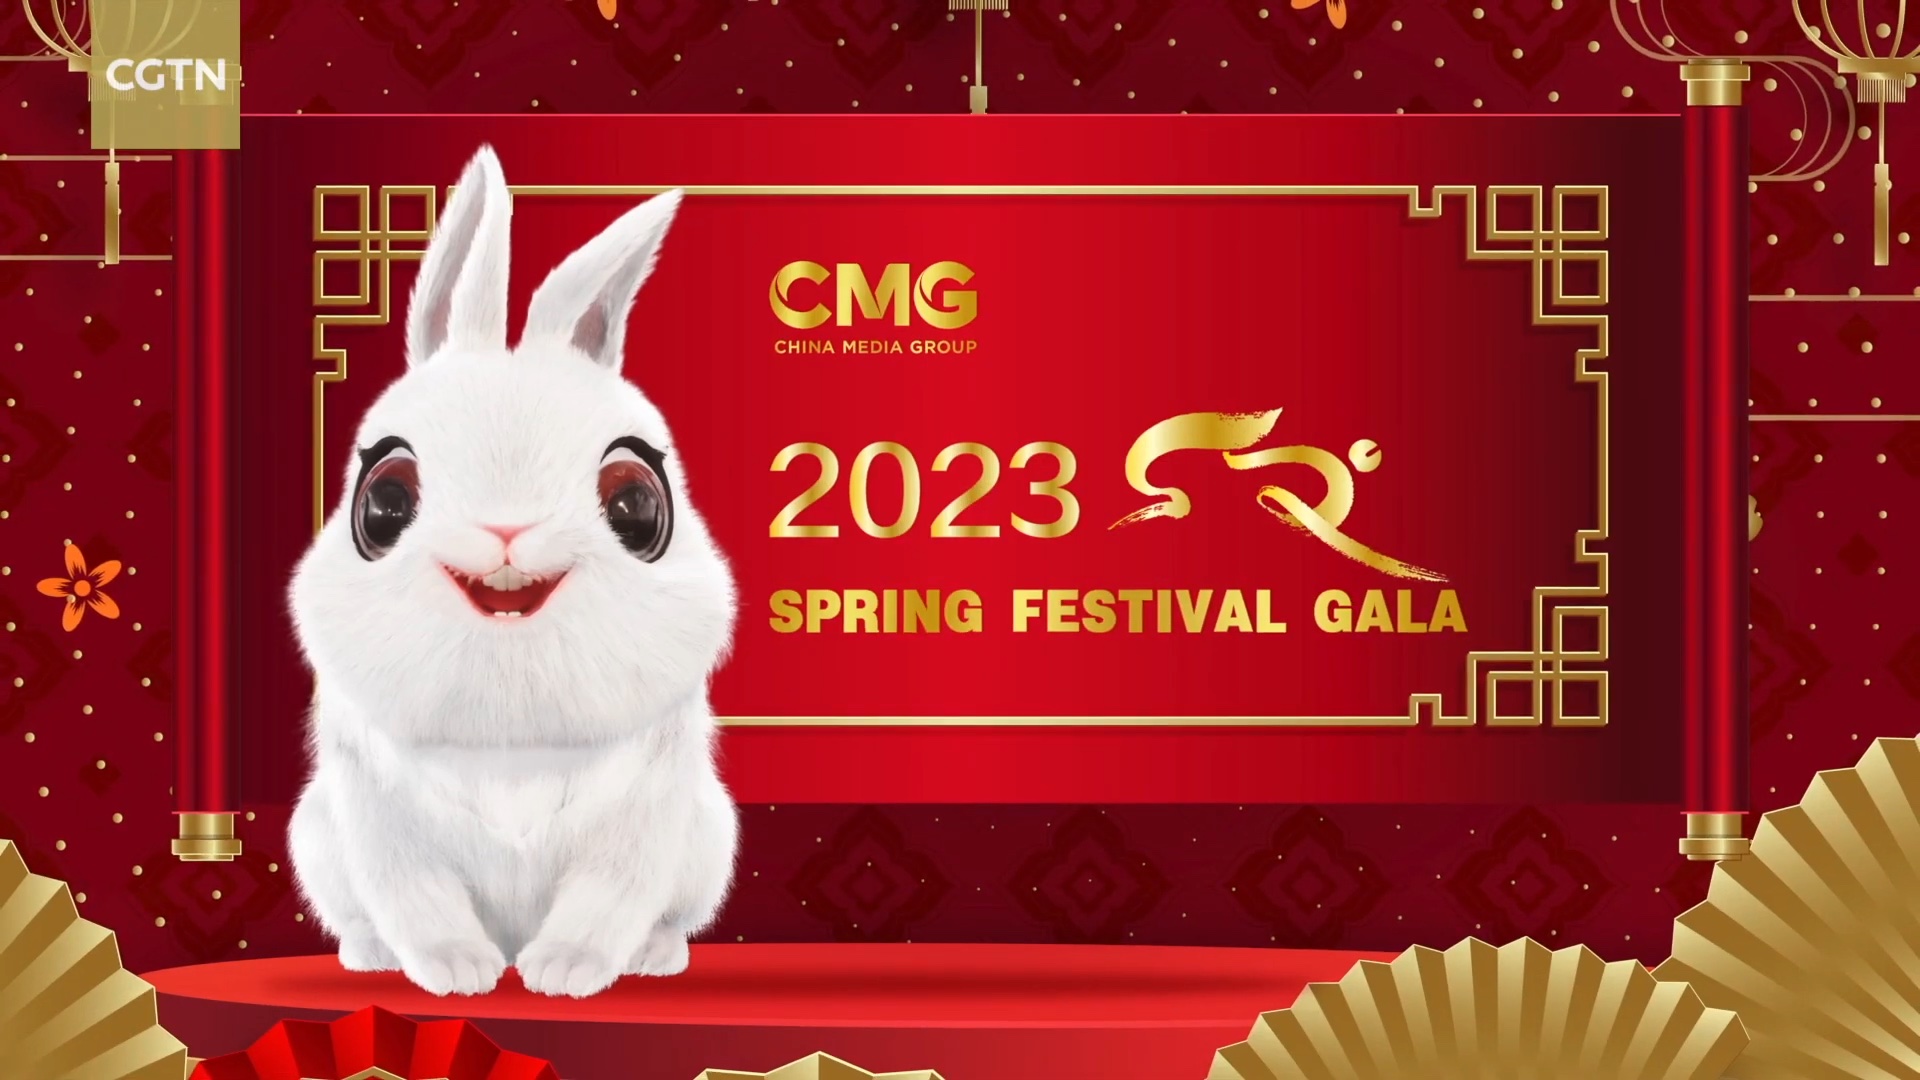 The 2023 CMG Spring Festival Gala is here! CGTN